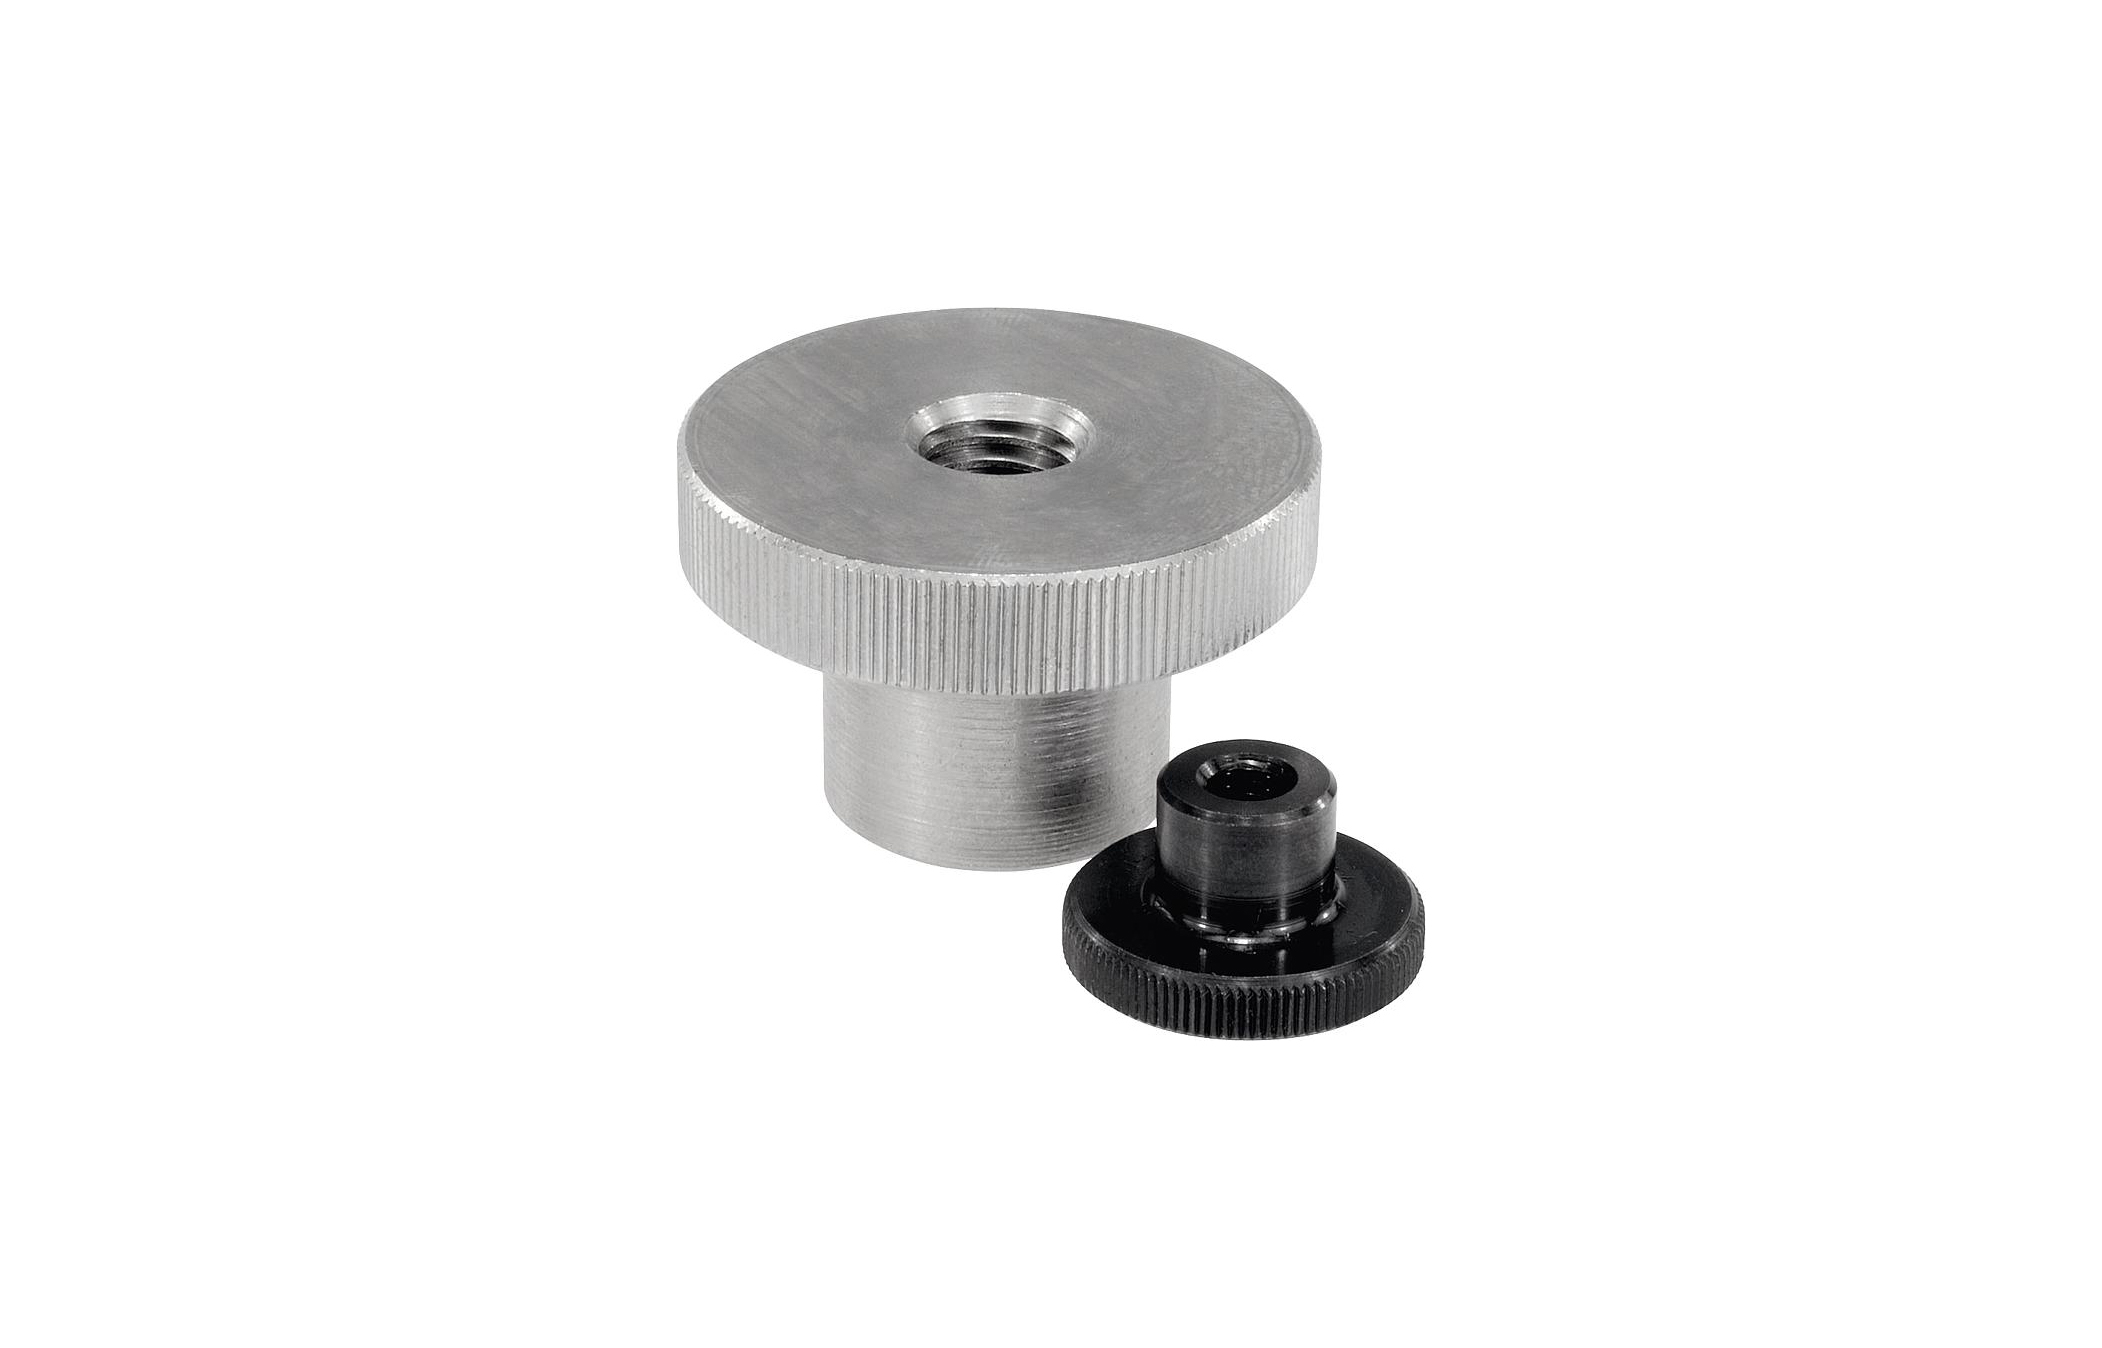 K0143 Knurled nuts high form